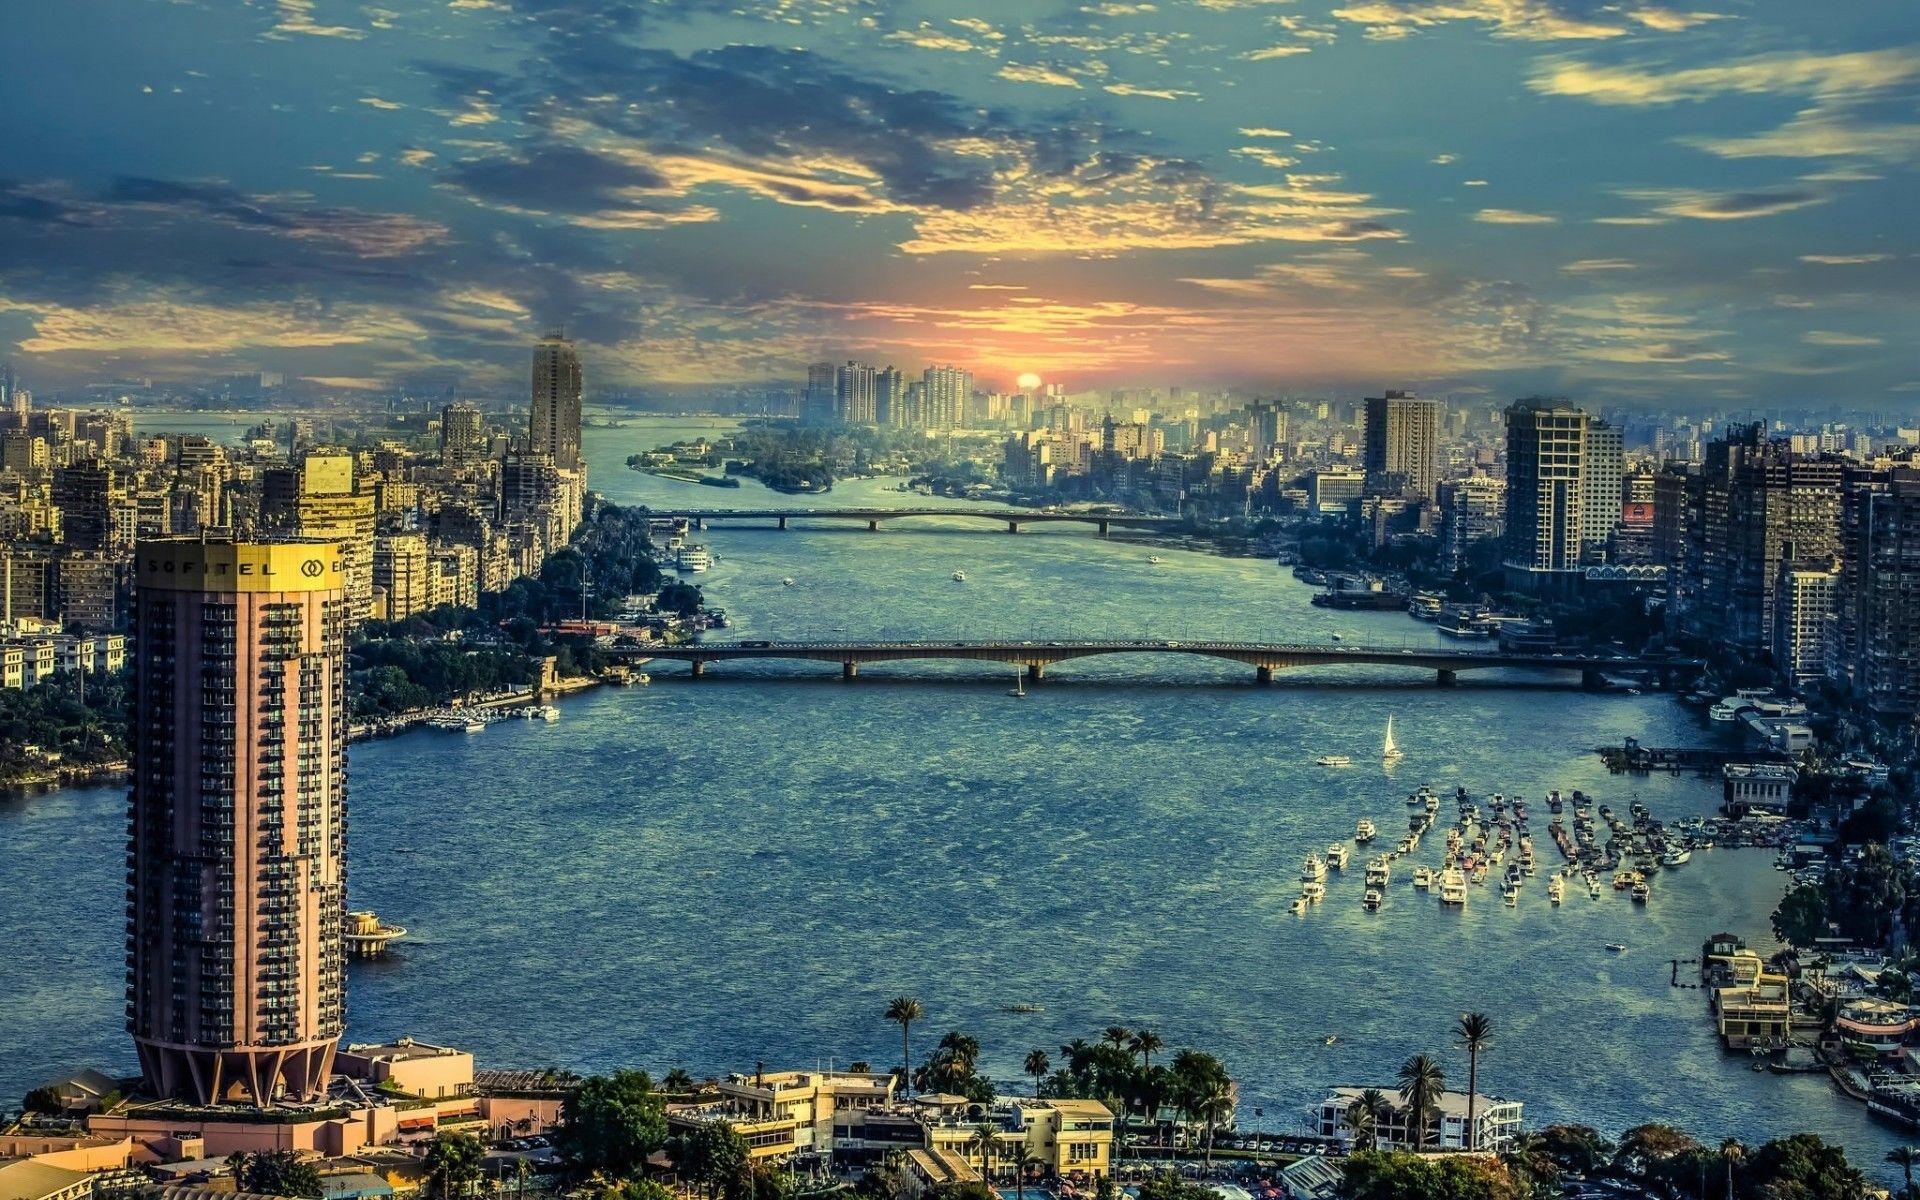 The River Nile in Cairo. Android wallpaper for free